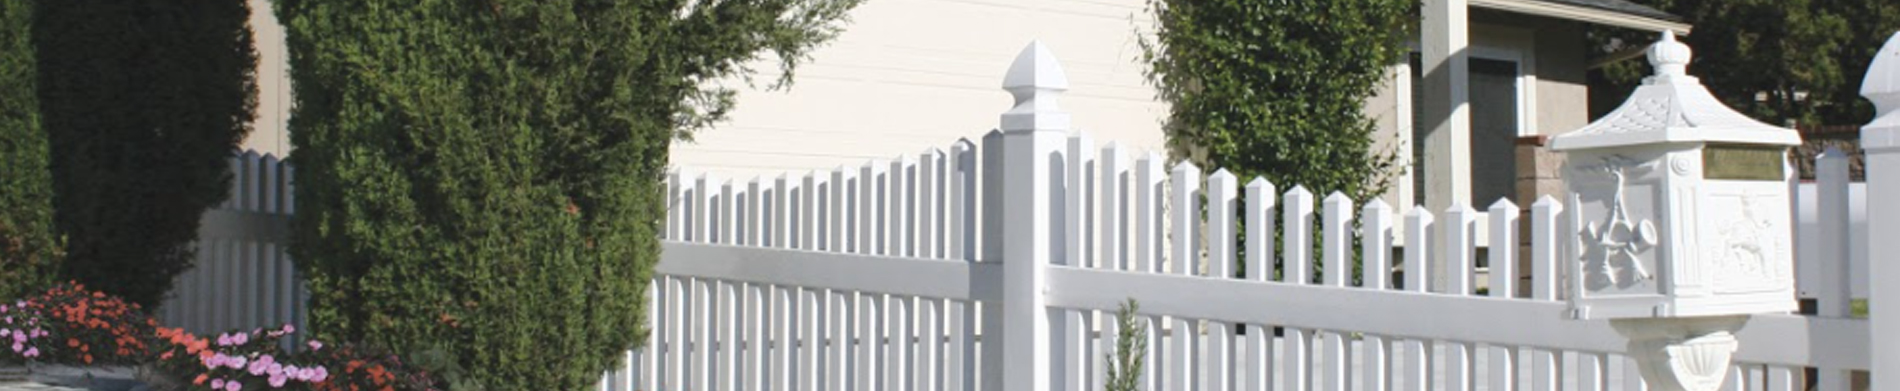 Duramax USA made vinyl fencing for your yard – durability, quality, beauty and so much more!